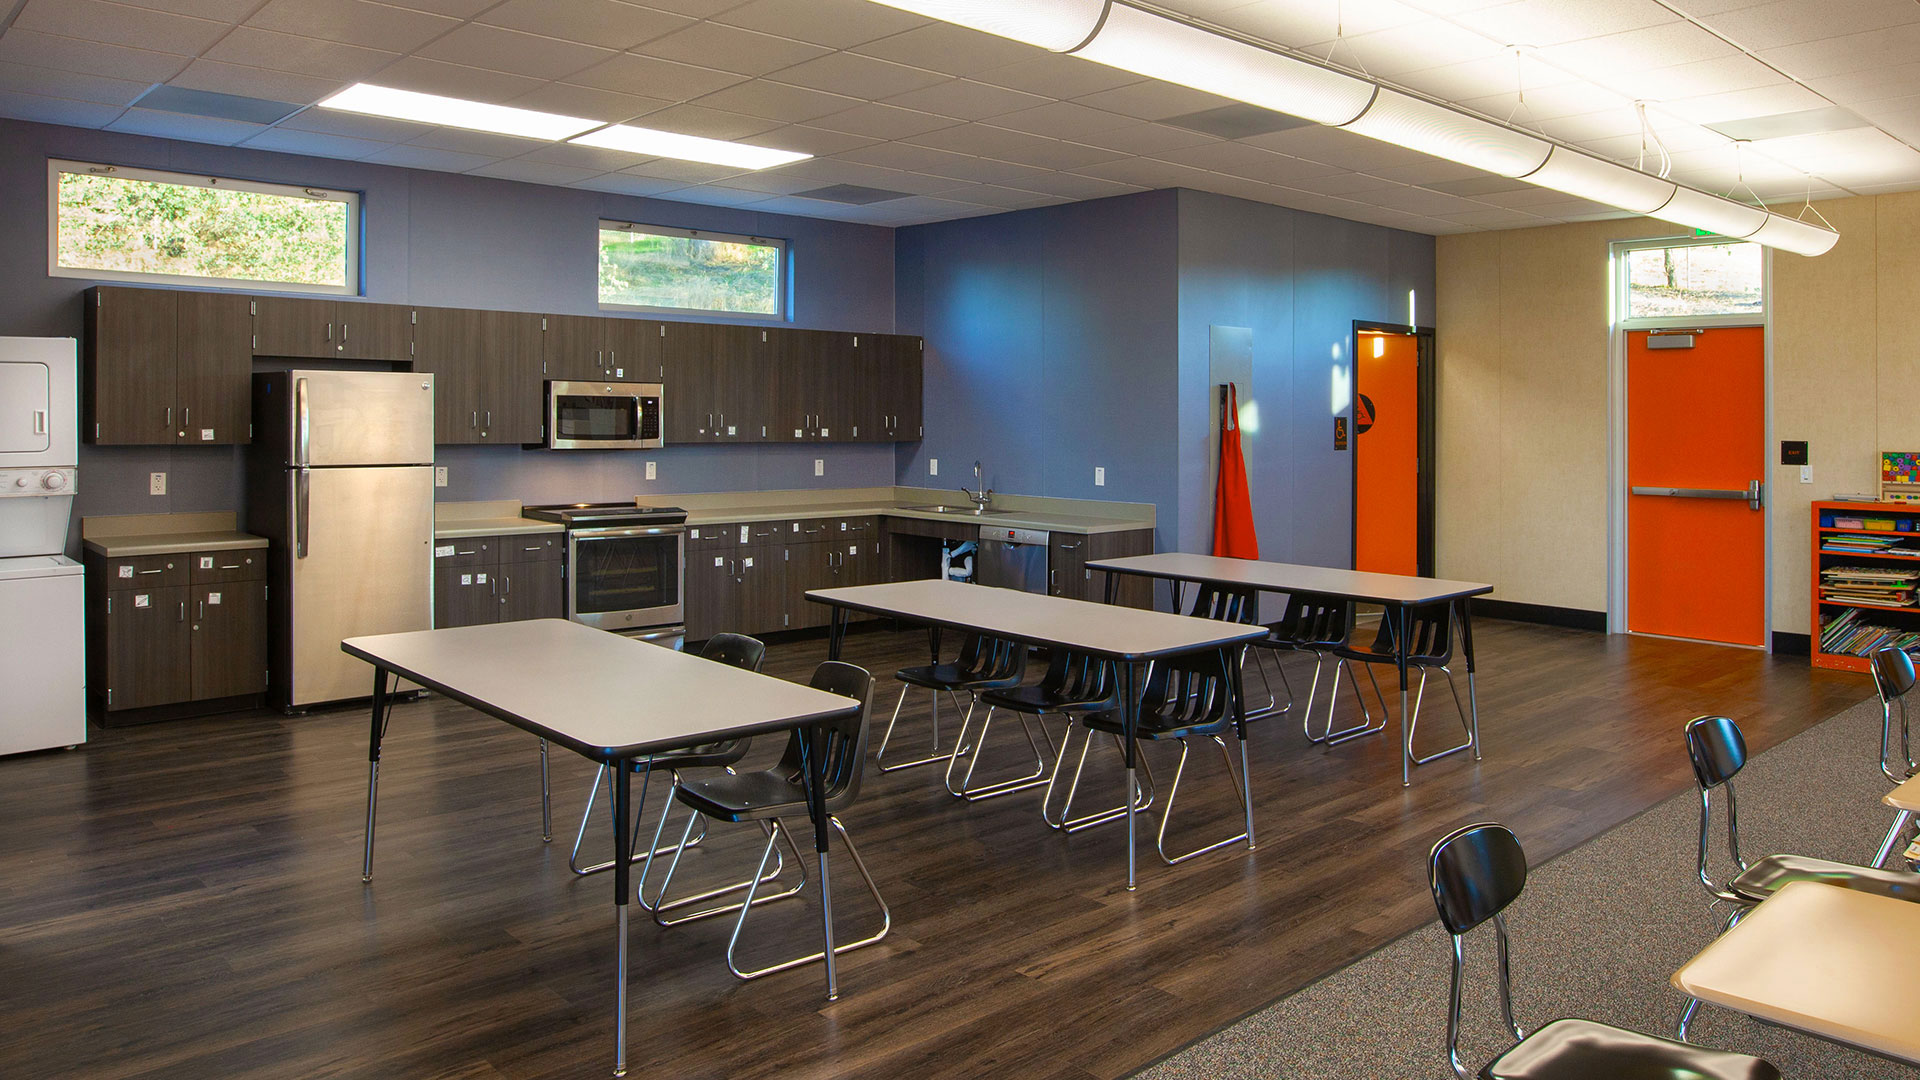 Interior of classroom with tables and kitchen area behind.